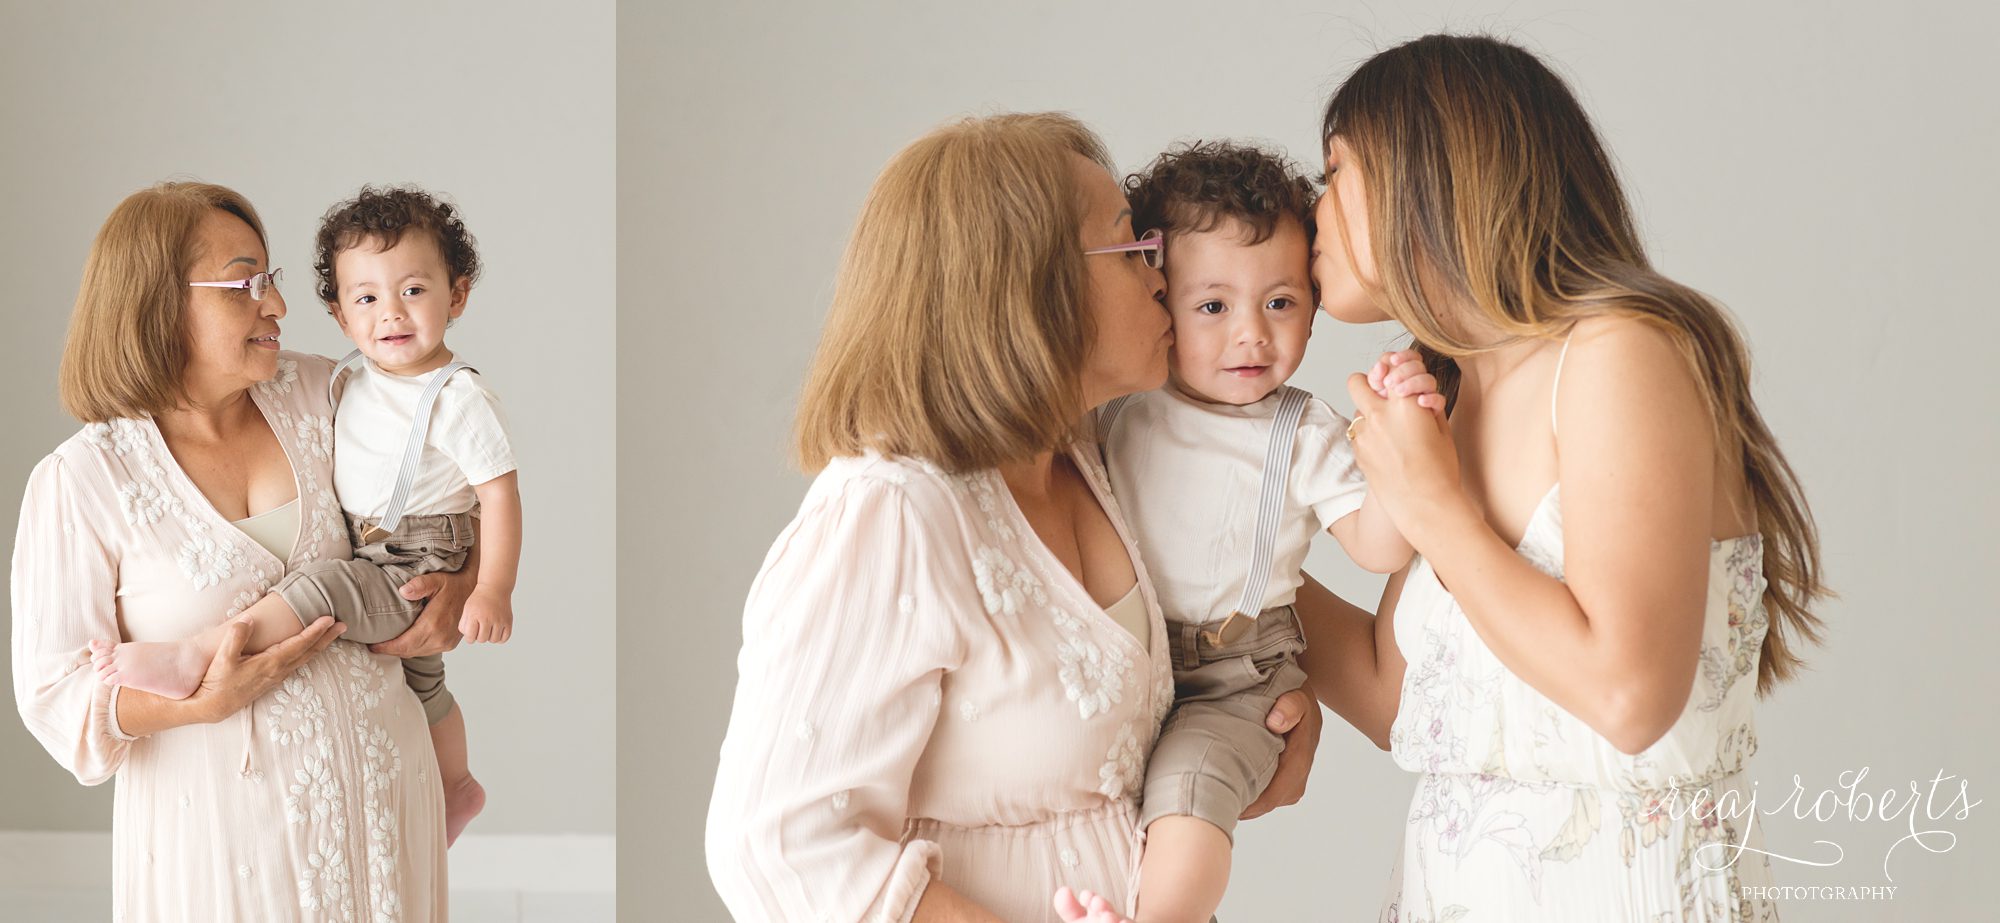 family photos with grandmother, daughter, and son by Reaj Roberts Photography